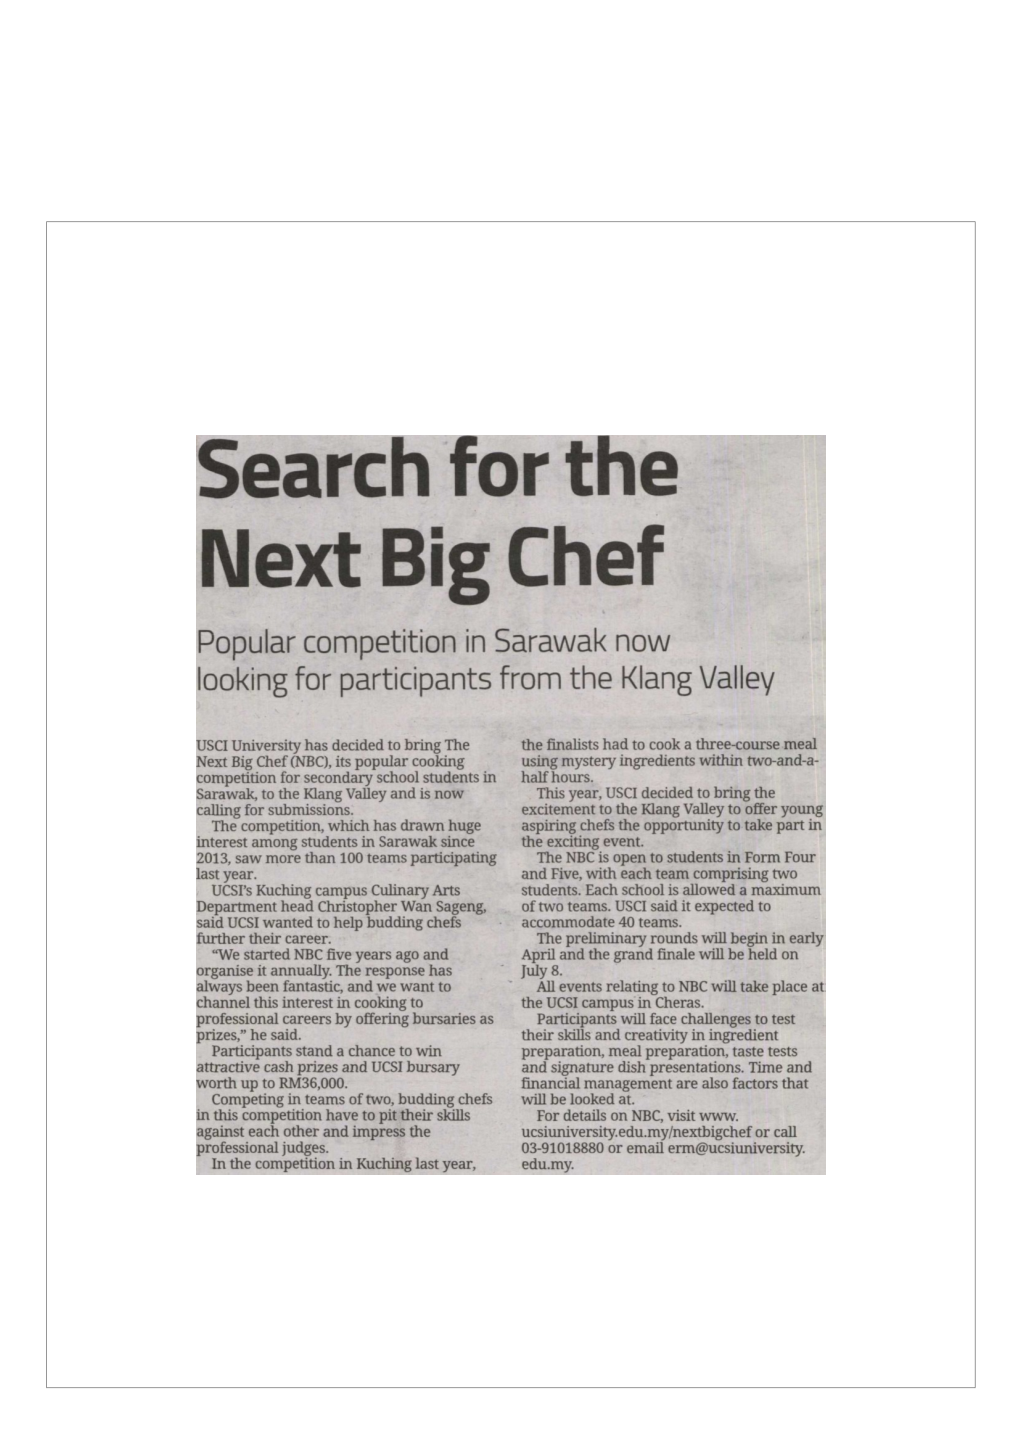 Next Big Chef Popular Competition in Sarawak Now Looking for Participants from the Klang Valley